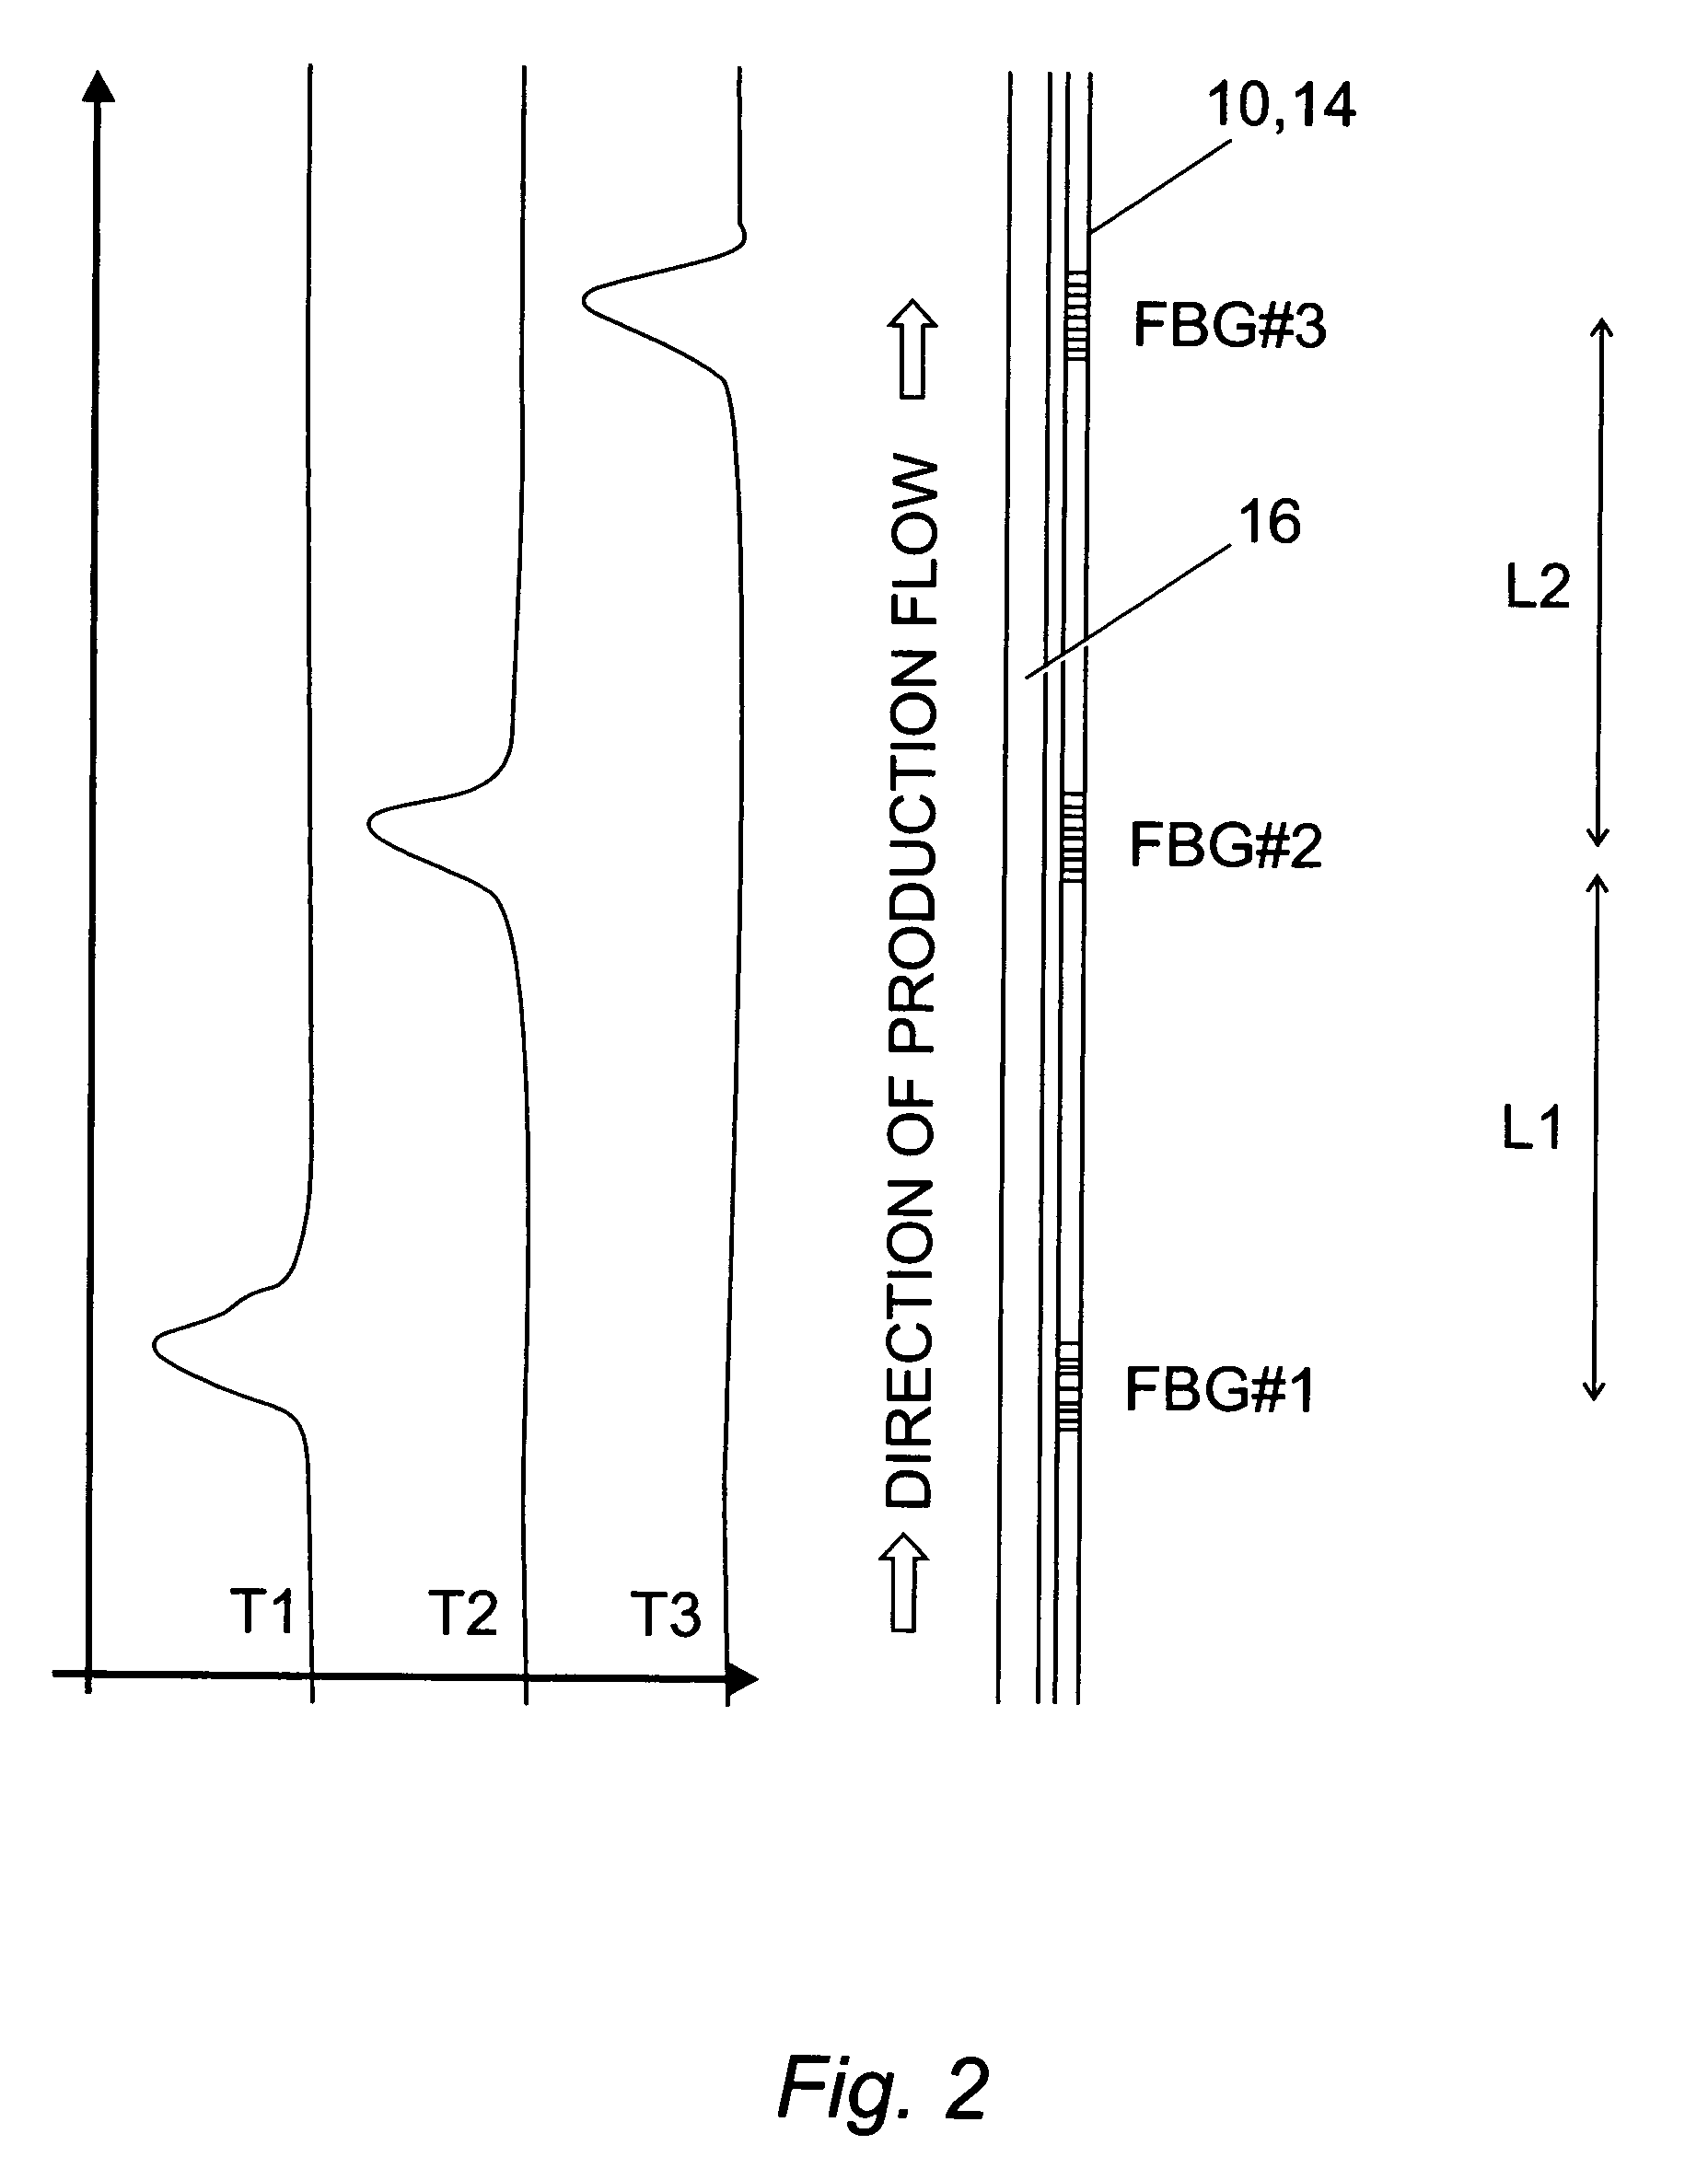 Methods of monitoring downhole conditions